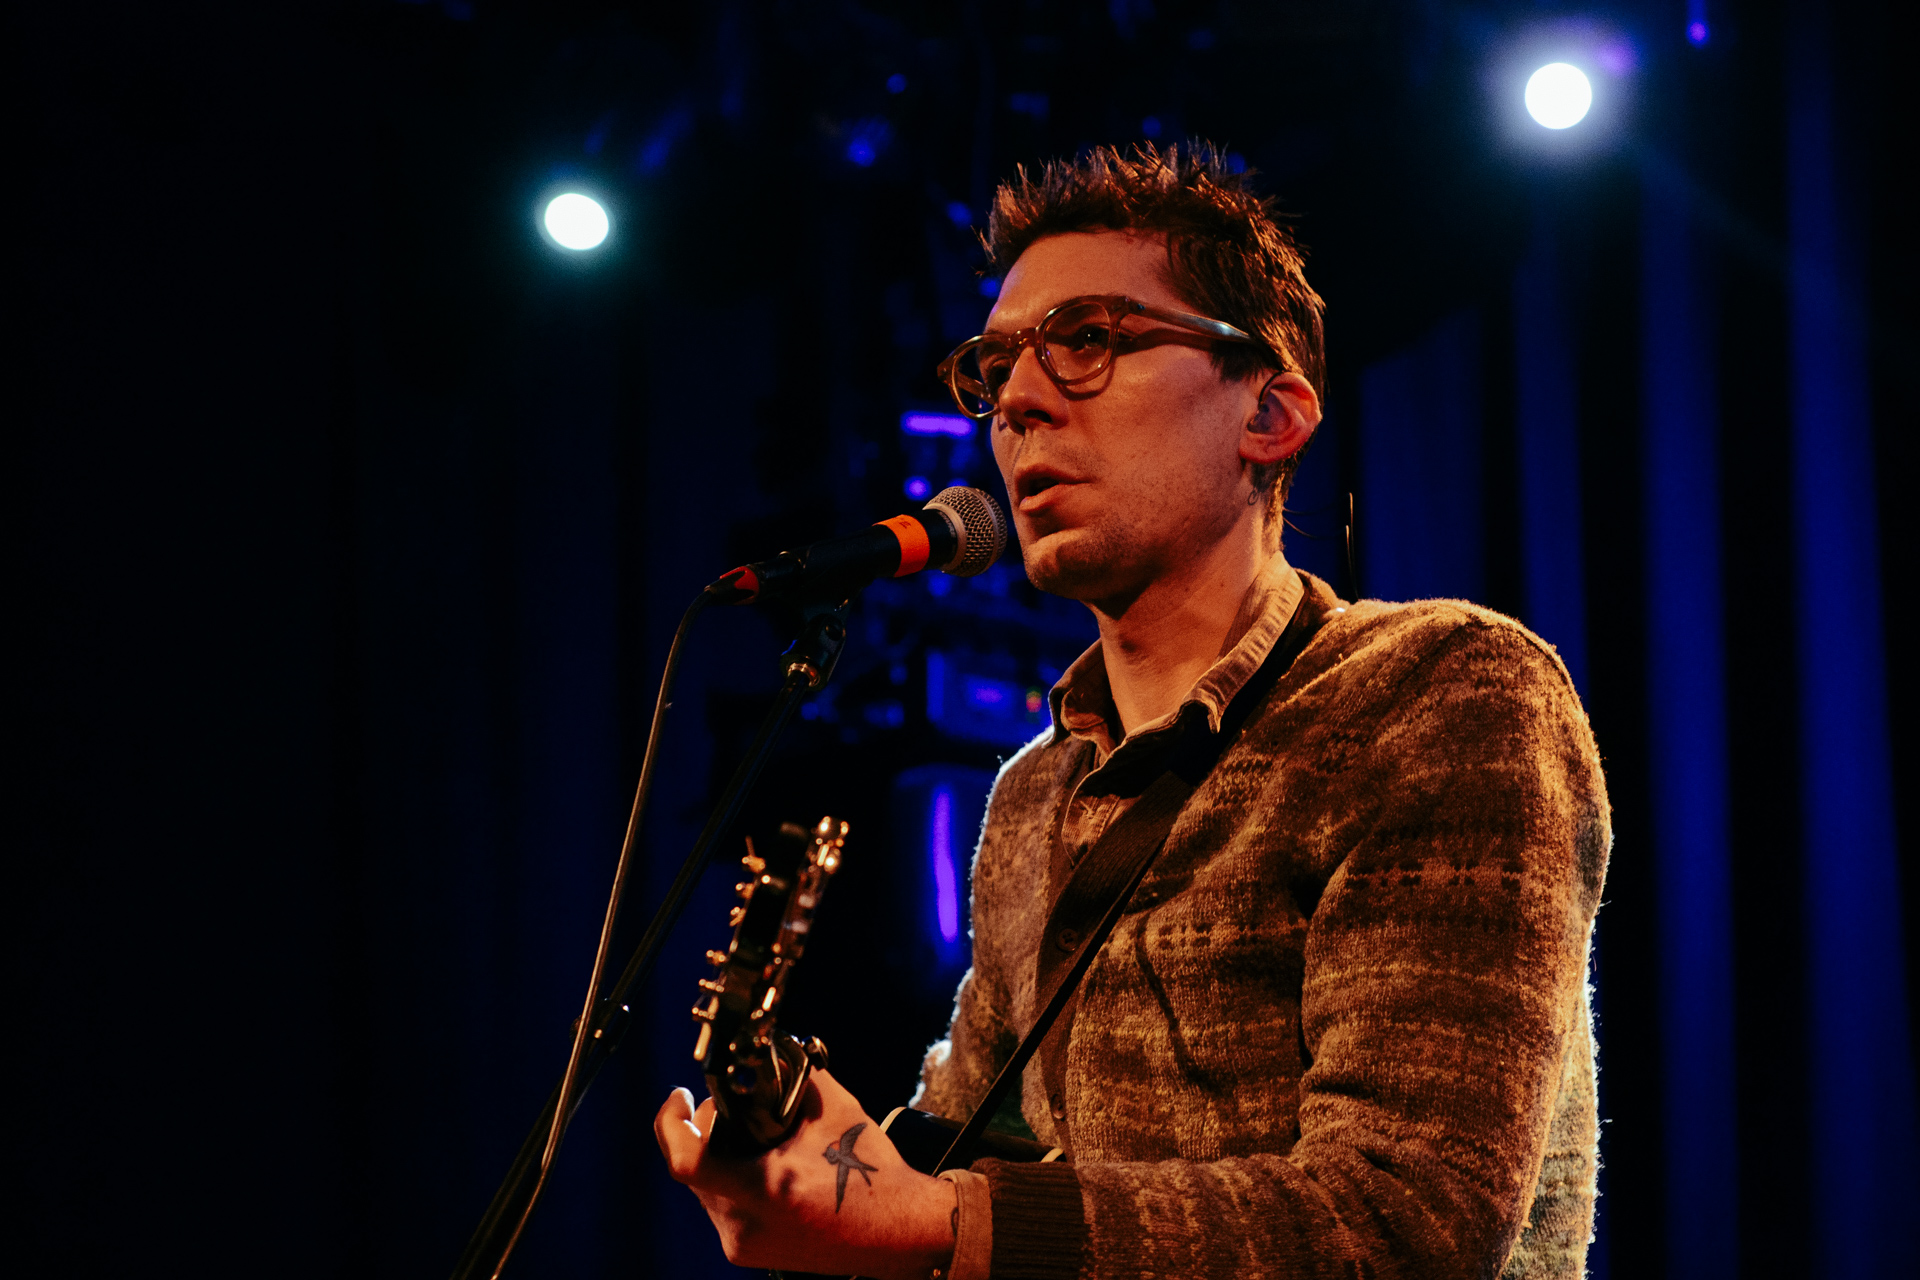 Justin Townes Earle (Photo by Matthijs van der Ven for The Influences)